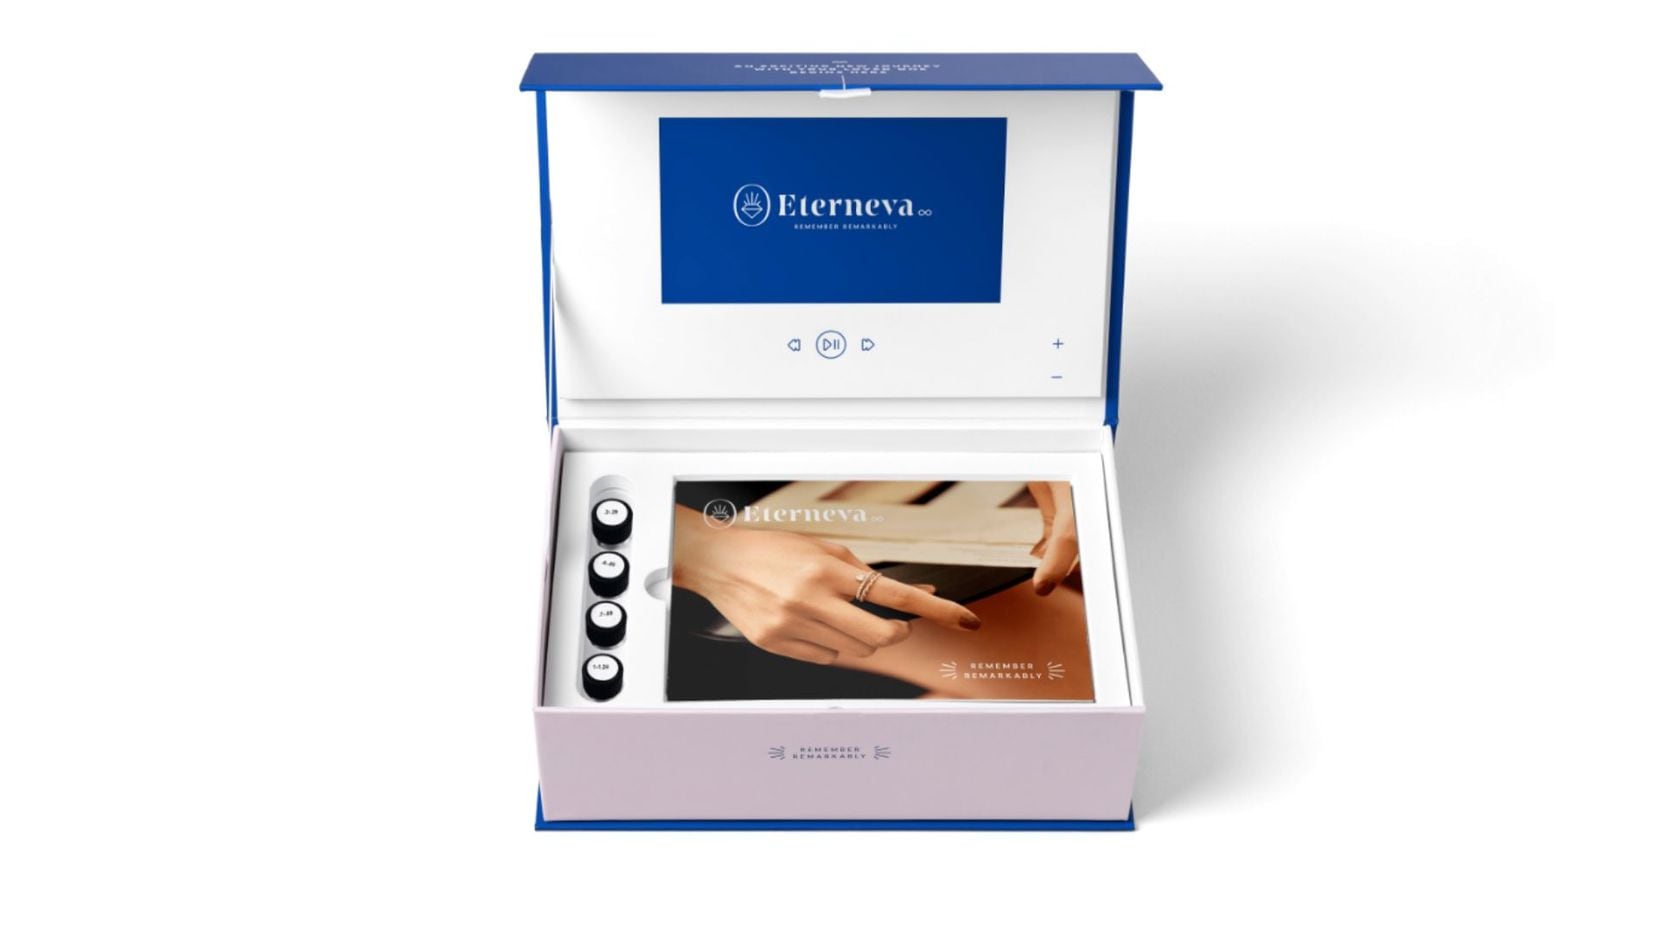 Austin-based afterlife diamond company Eterneva says its becoming more transparent about the...